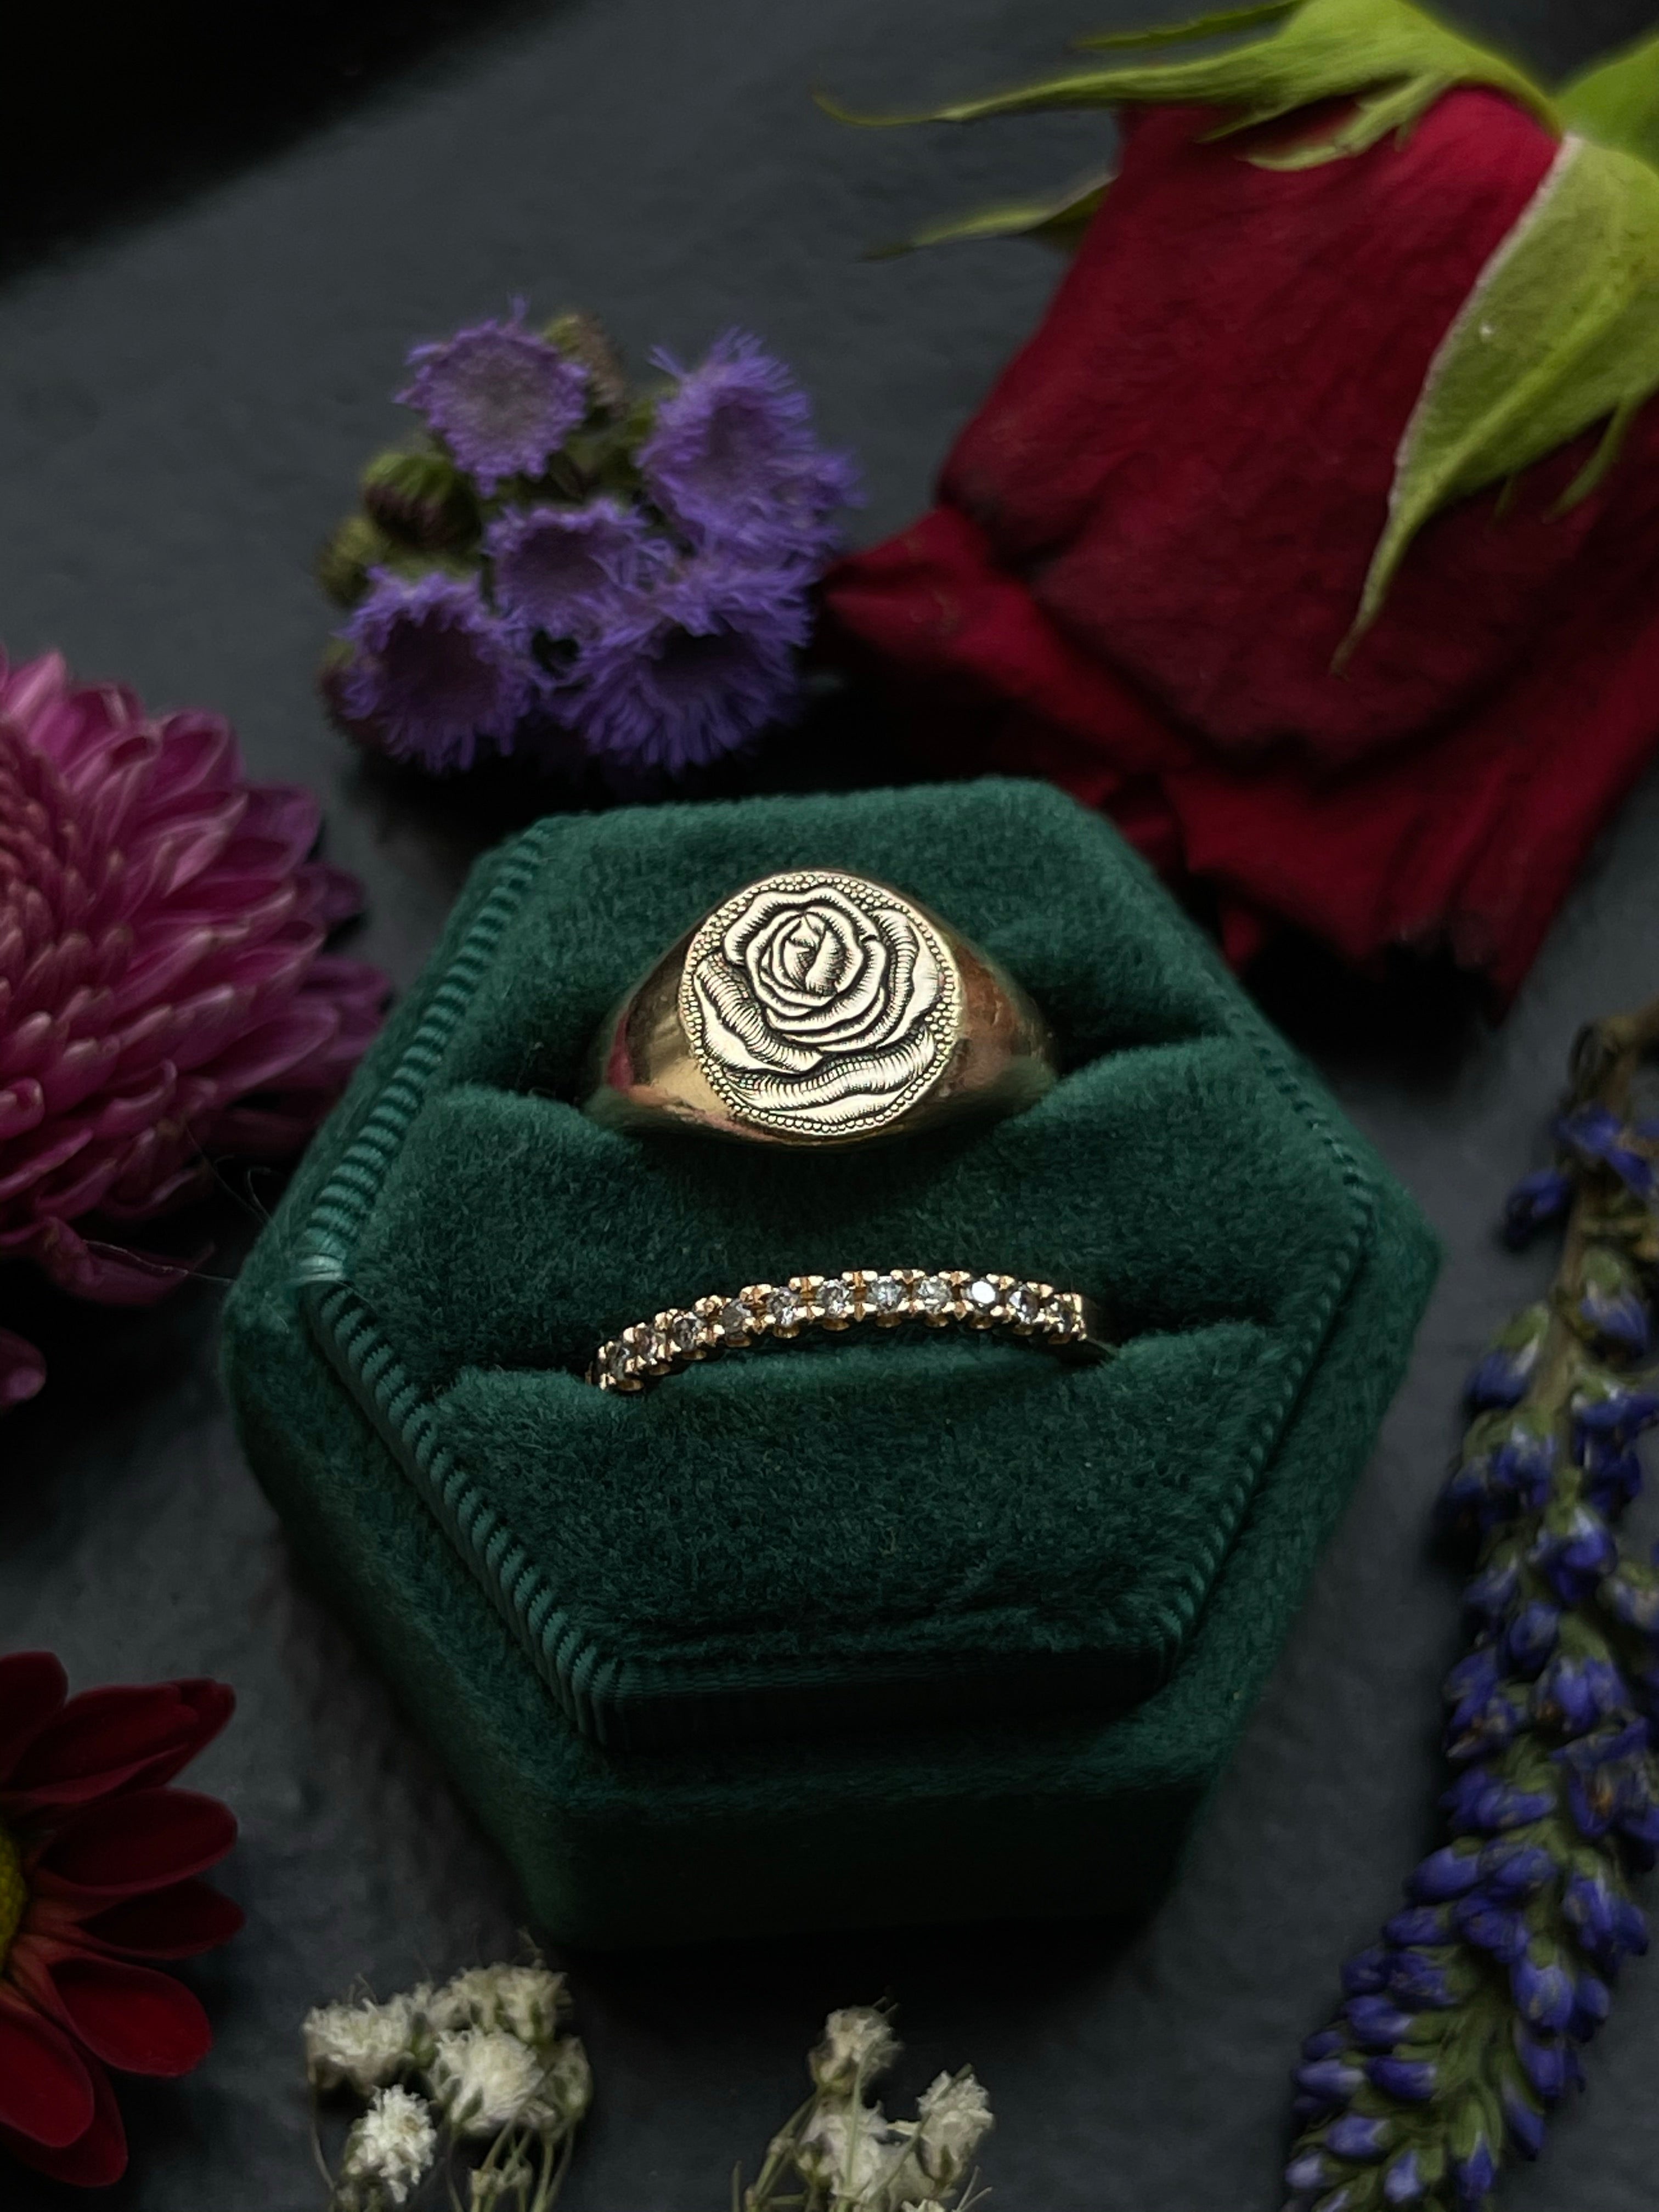 Blooming Rose Engagement Ring Collection